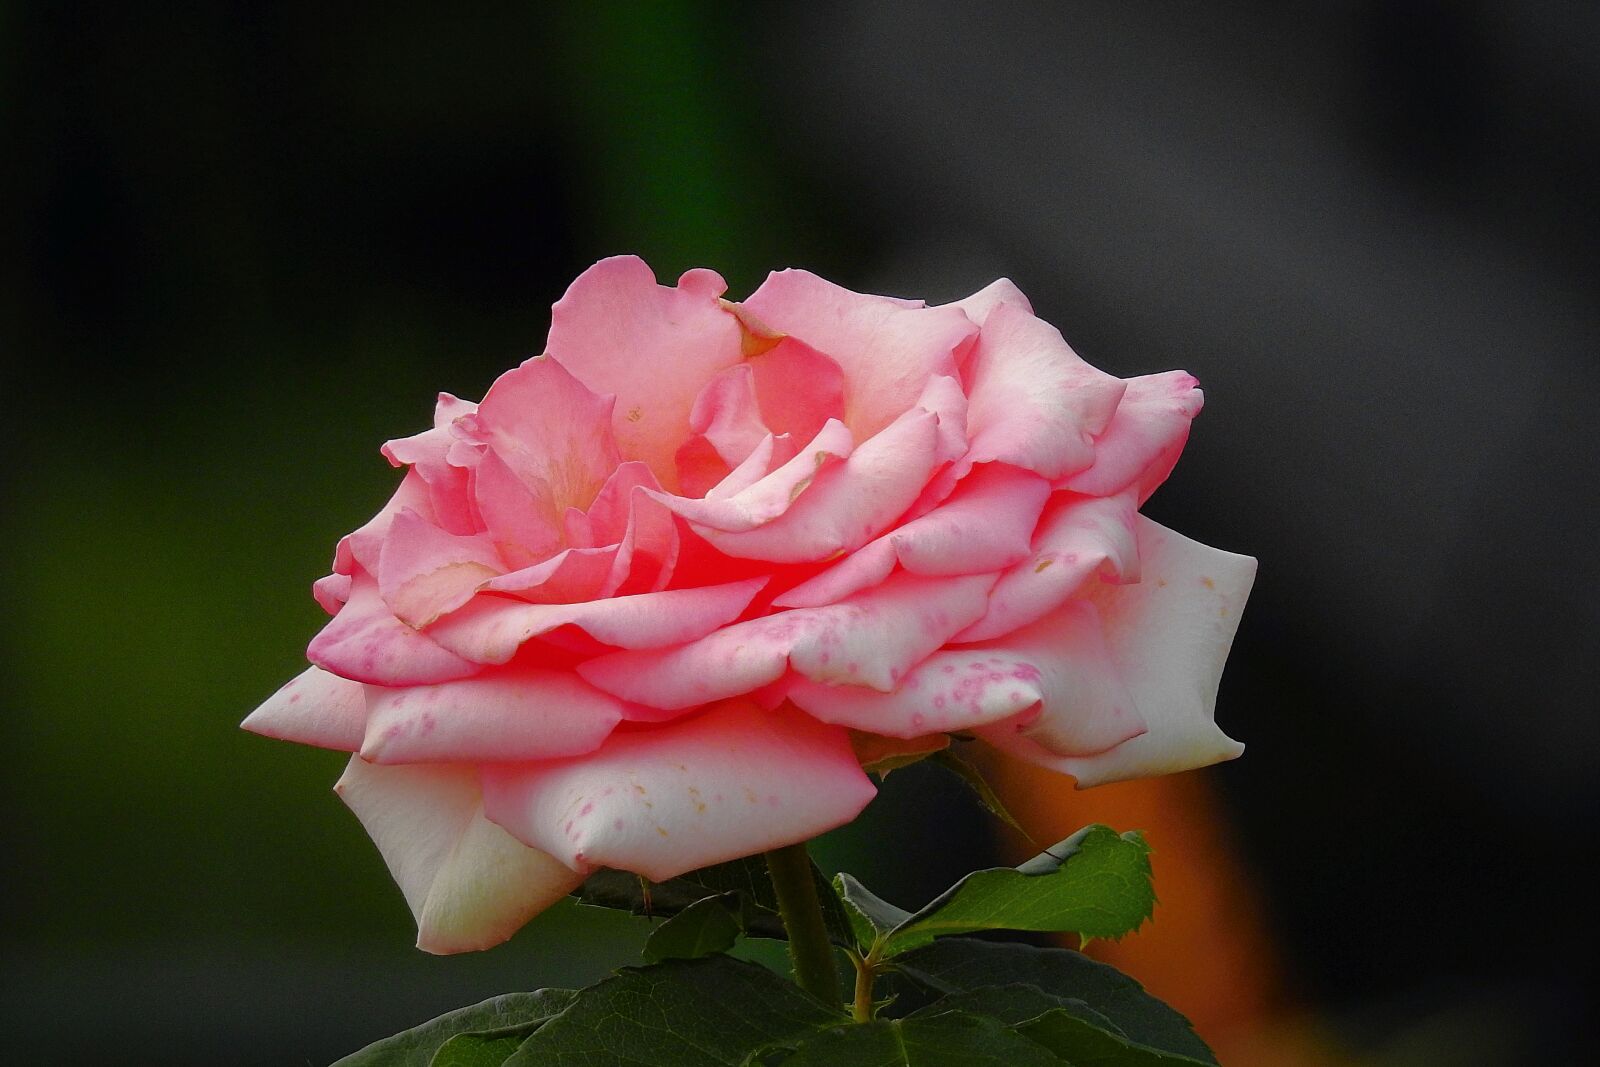 Nikon Coolpix P900 sample photo. Rose, the beauty of photography